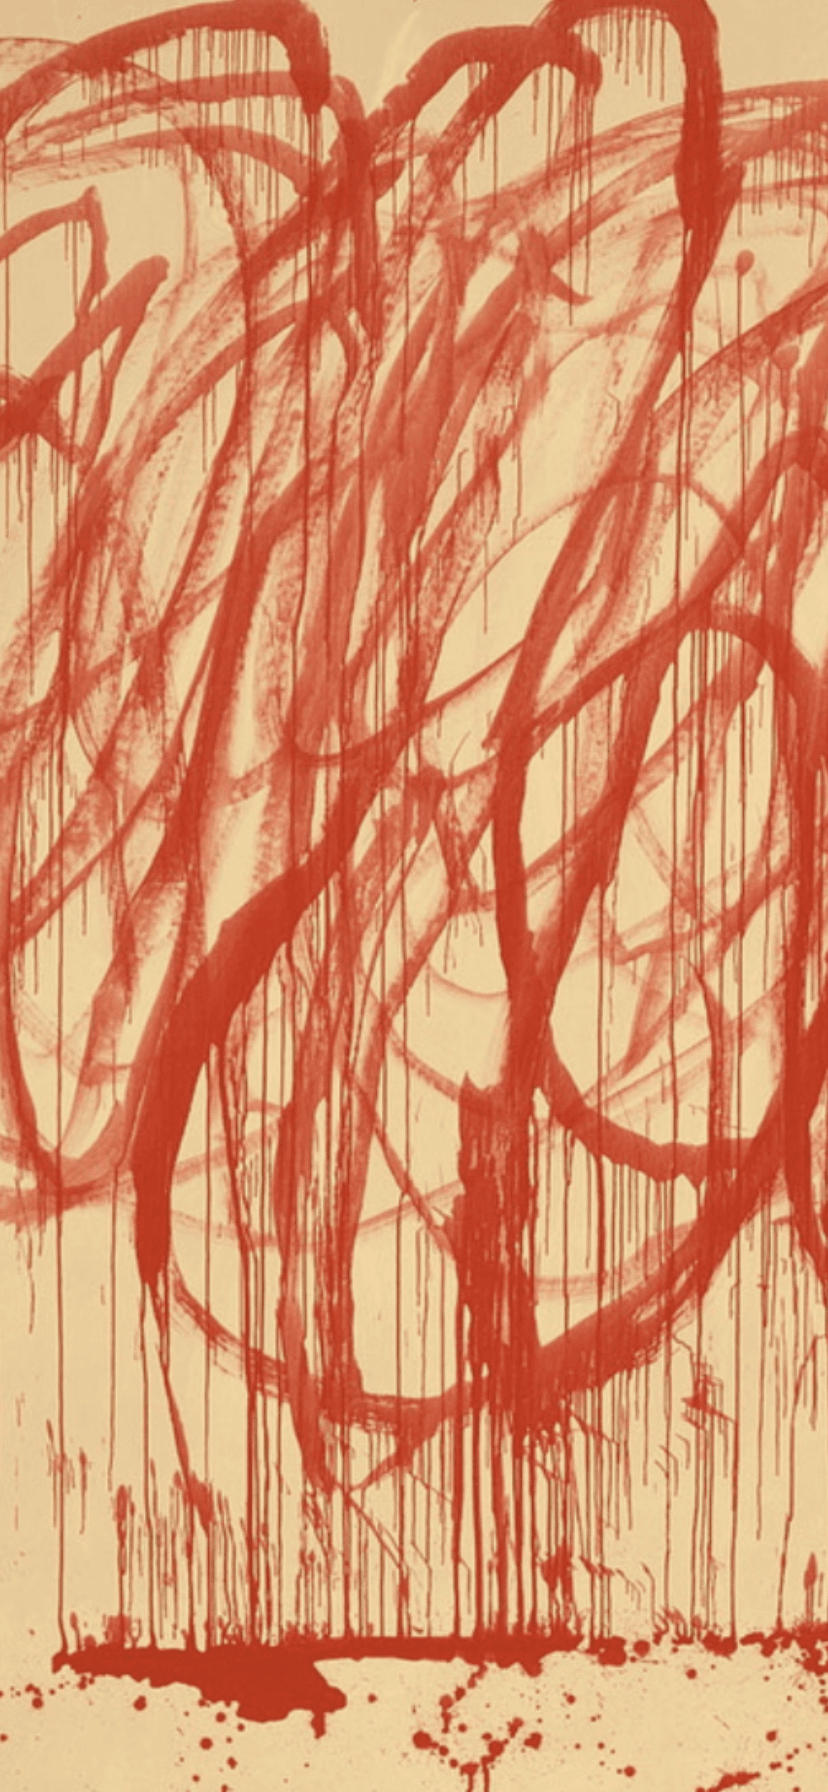 20Cy Twombly